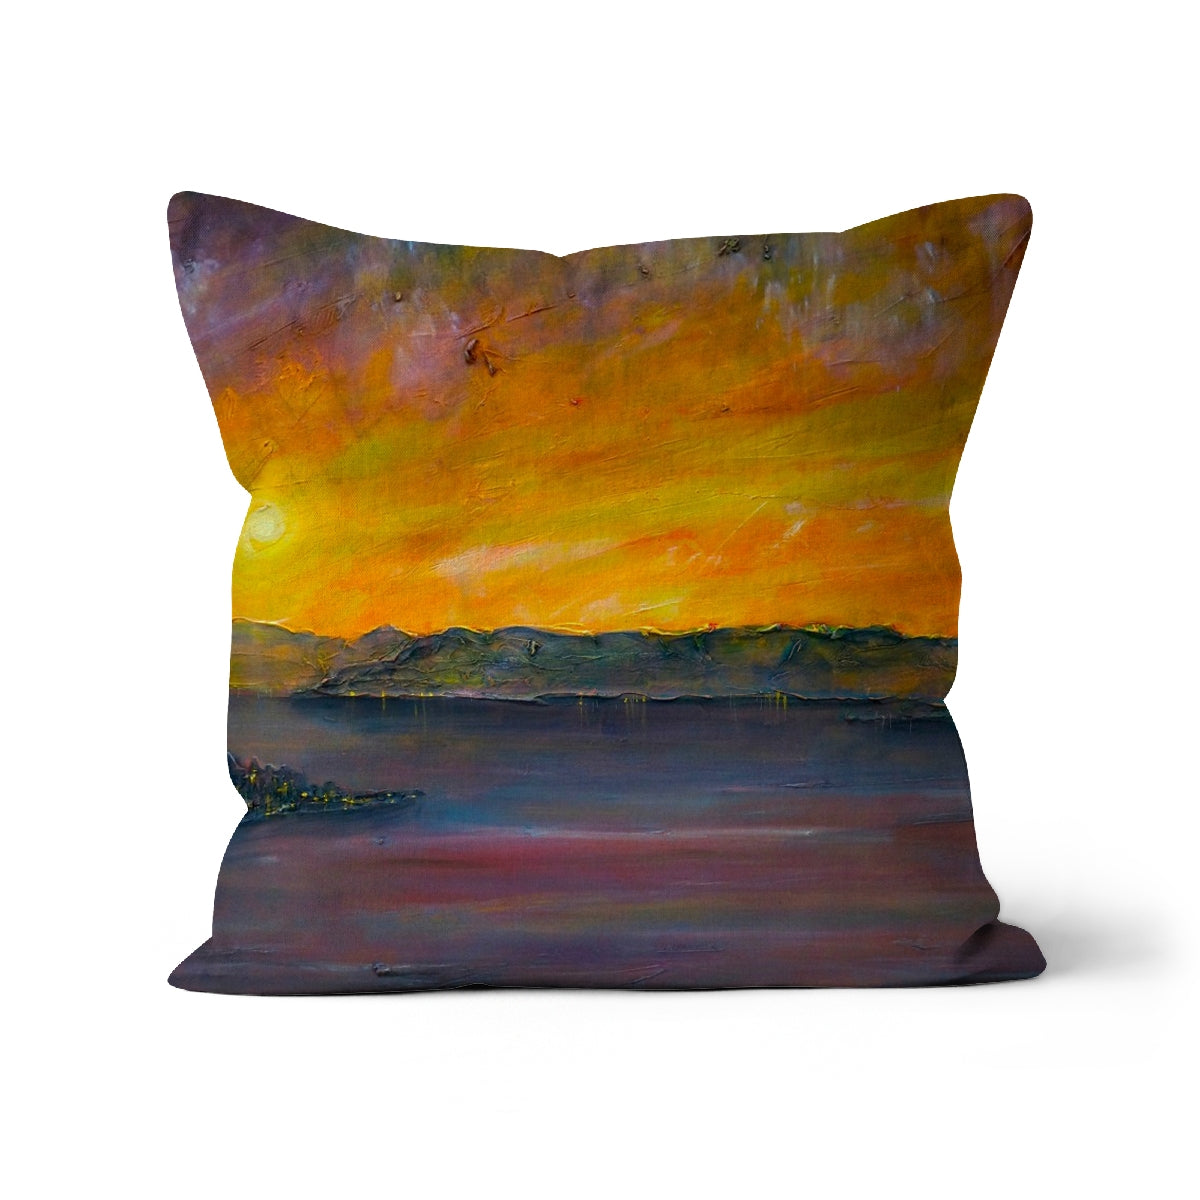 Sunset Over Gourock Art Gifts Cushion-Cushions-River Clyde Art Gallery-Linen-16"x16"-Paintings, Prints, Homeware, Art Gifts From Scotland By Scottish Artist Kevin Hunter